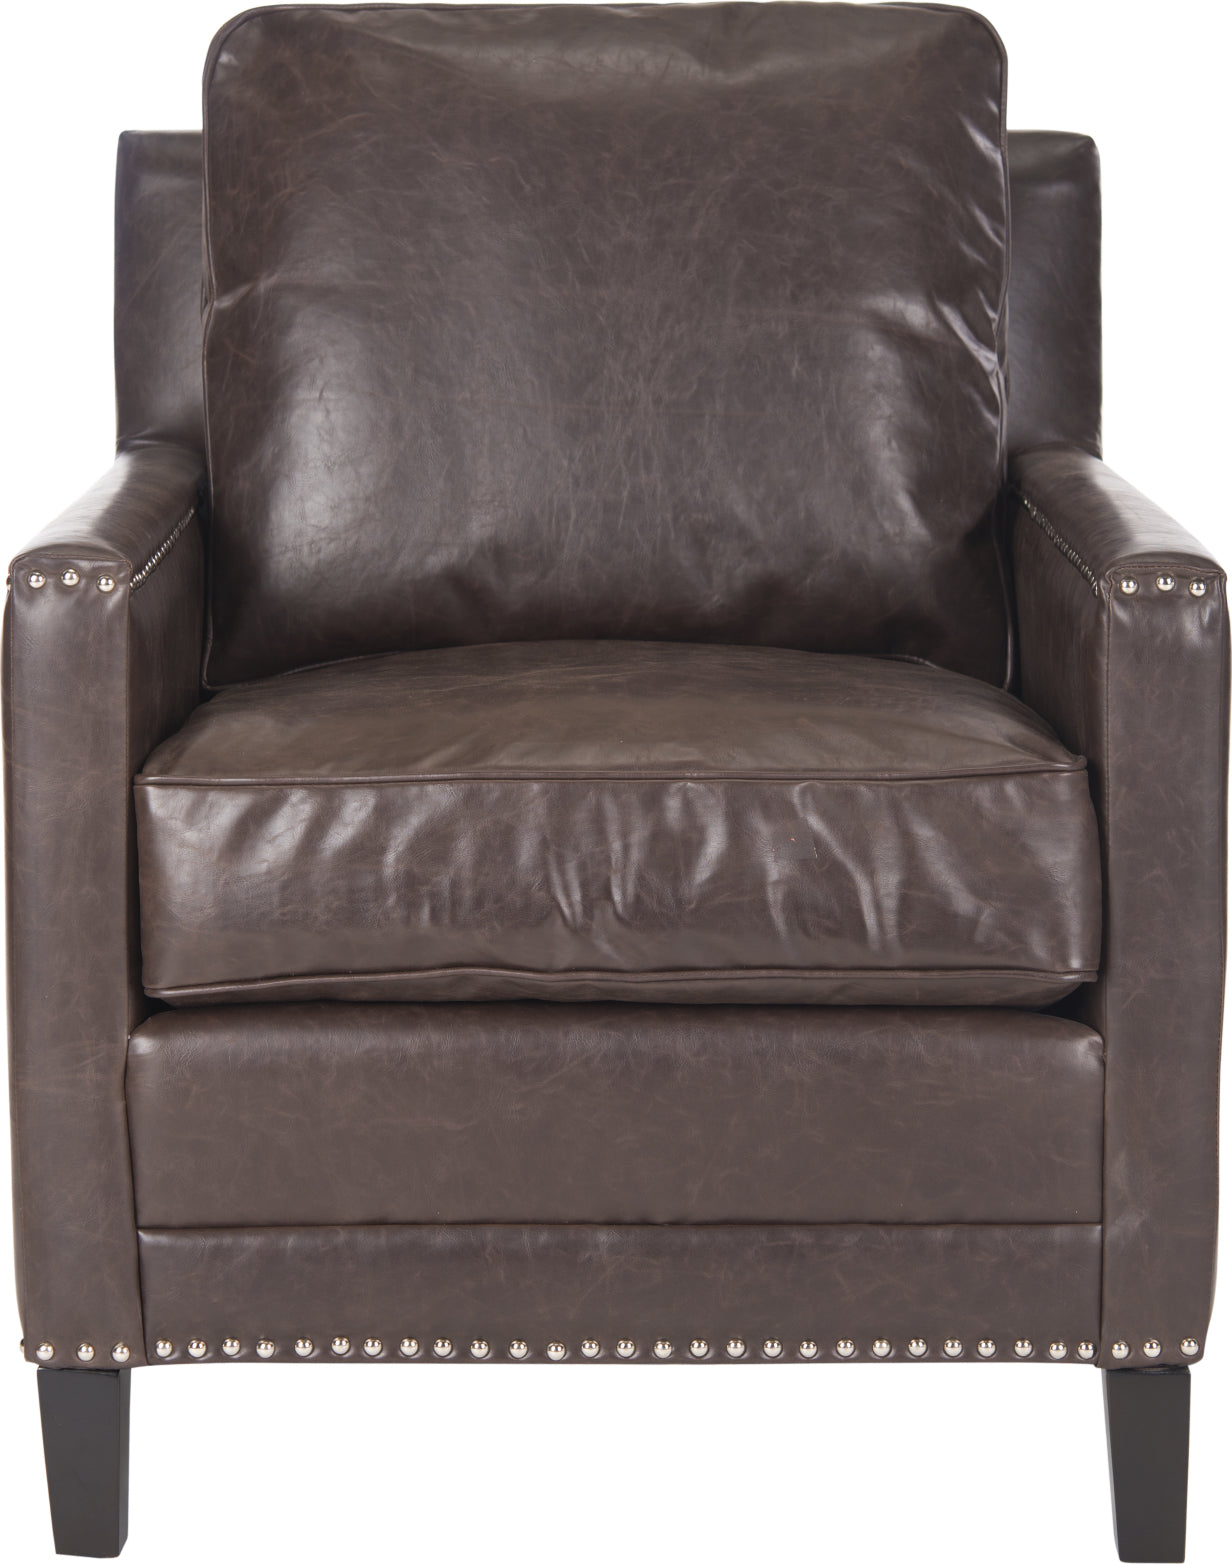 Safavieh Buckler Club Chair-Silver Nail Heads Antique Brown and Espresso Furniture main image